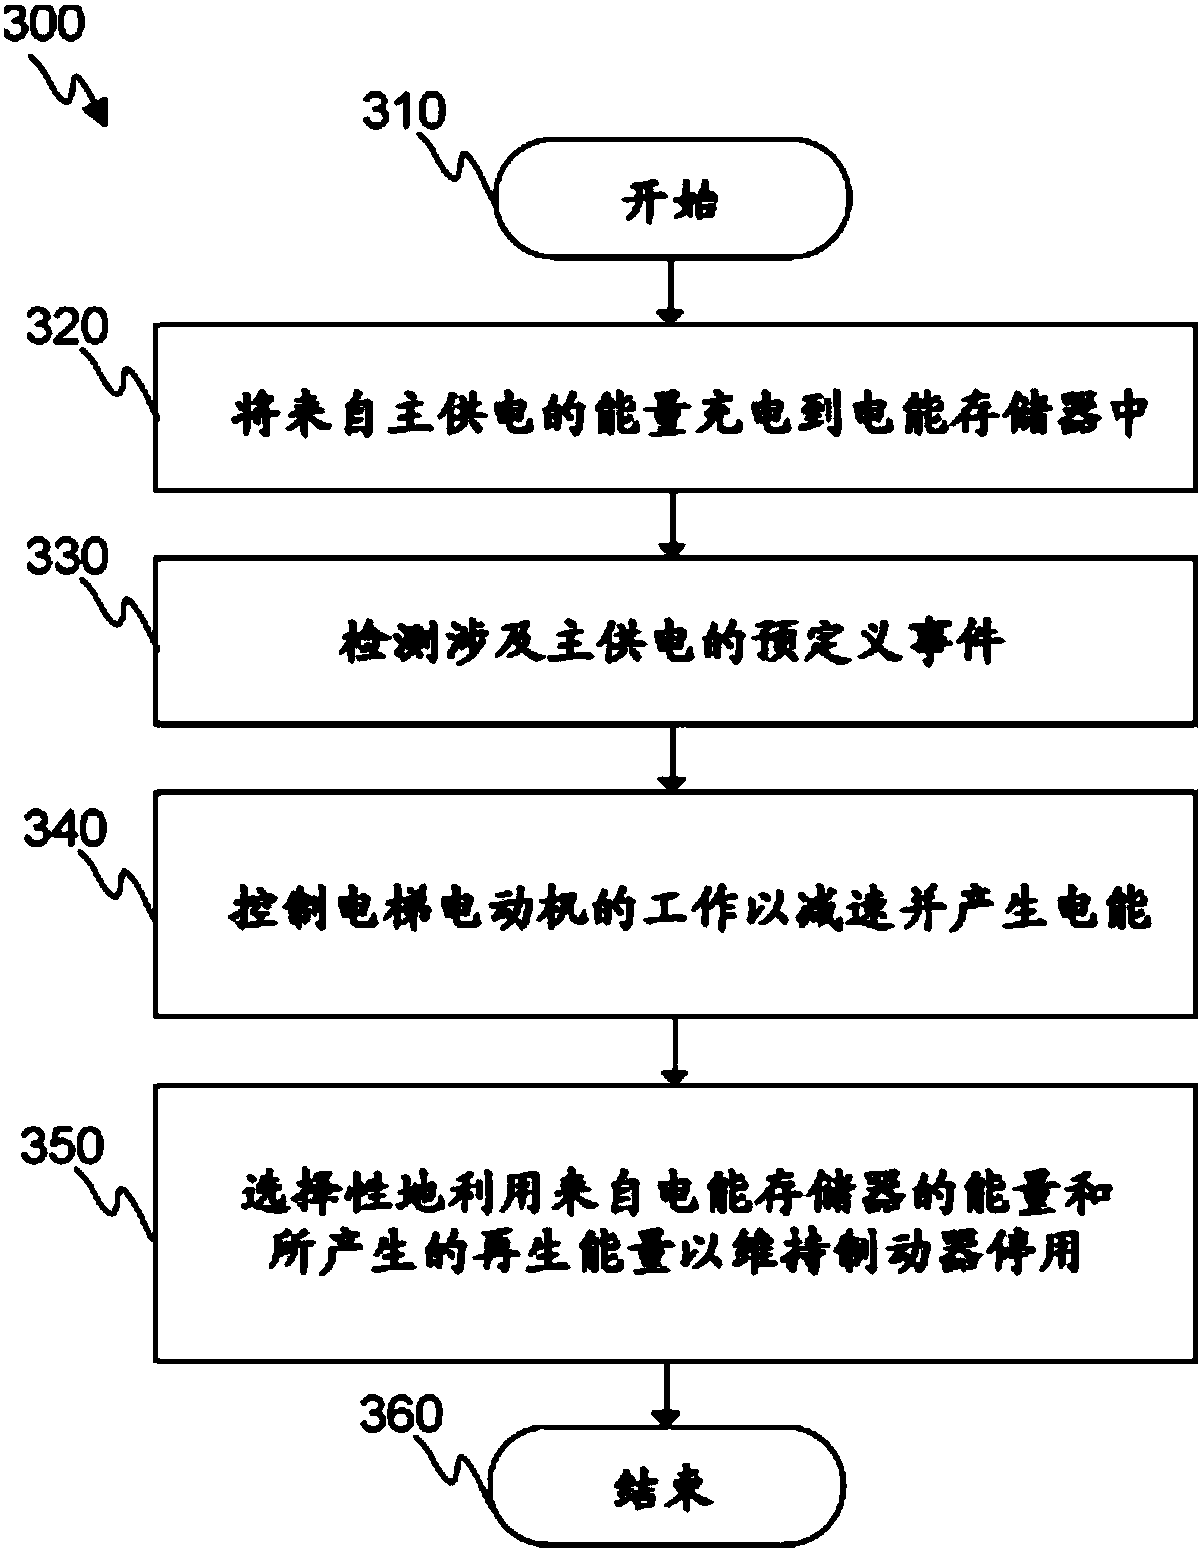 Method for moving an elevator car to landing floor in case of event related to main electrical power supply of the elevator